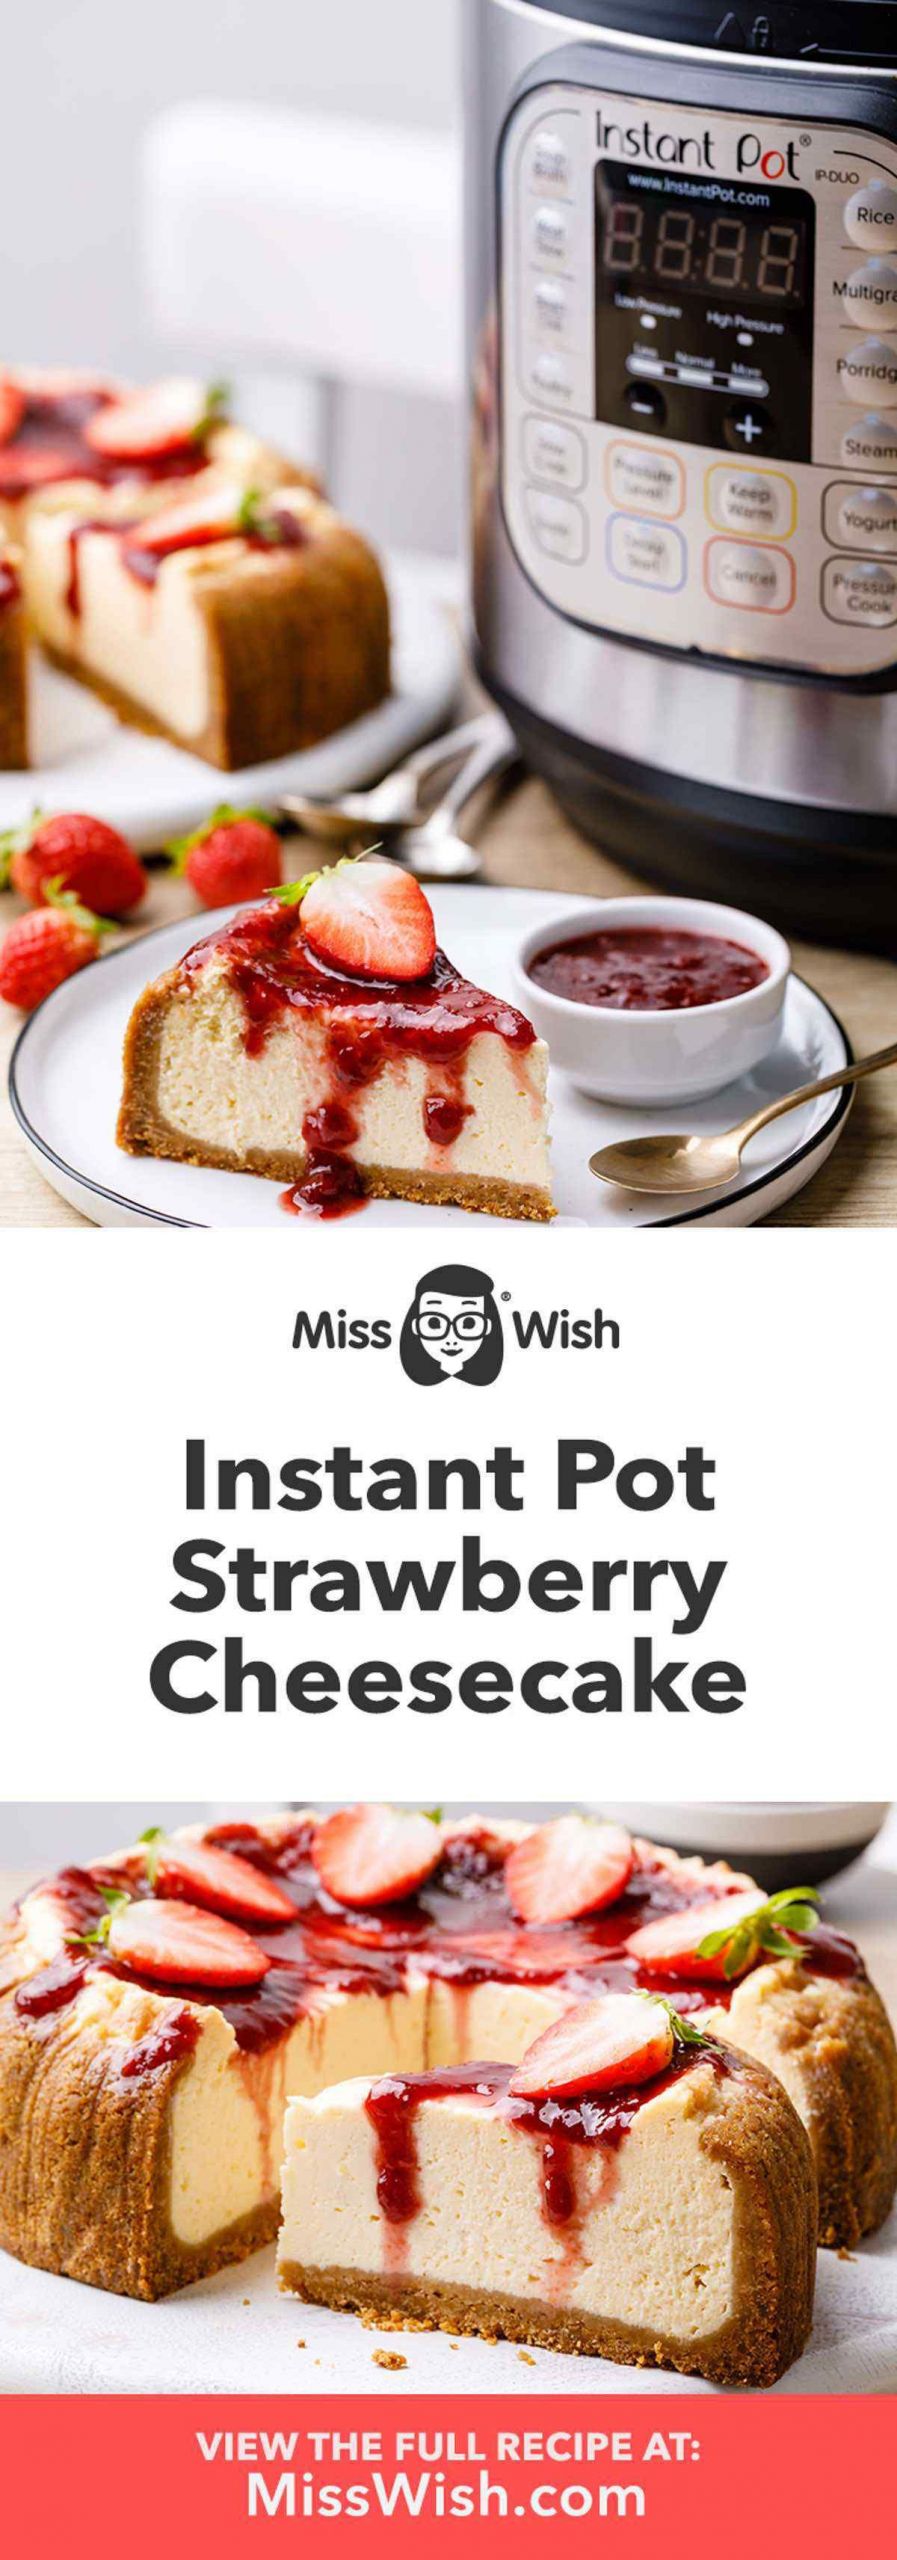 New York Times Instant Pot Recipes
 The Best Instant Pot Strawberry Cheesecake Ever New York